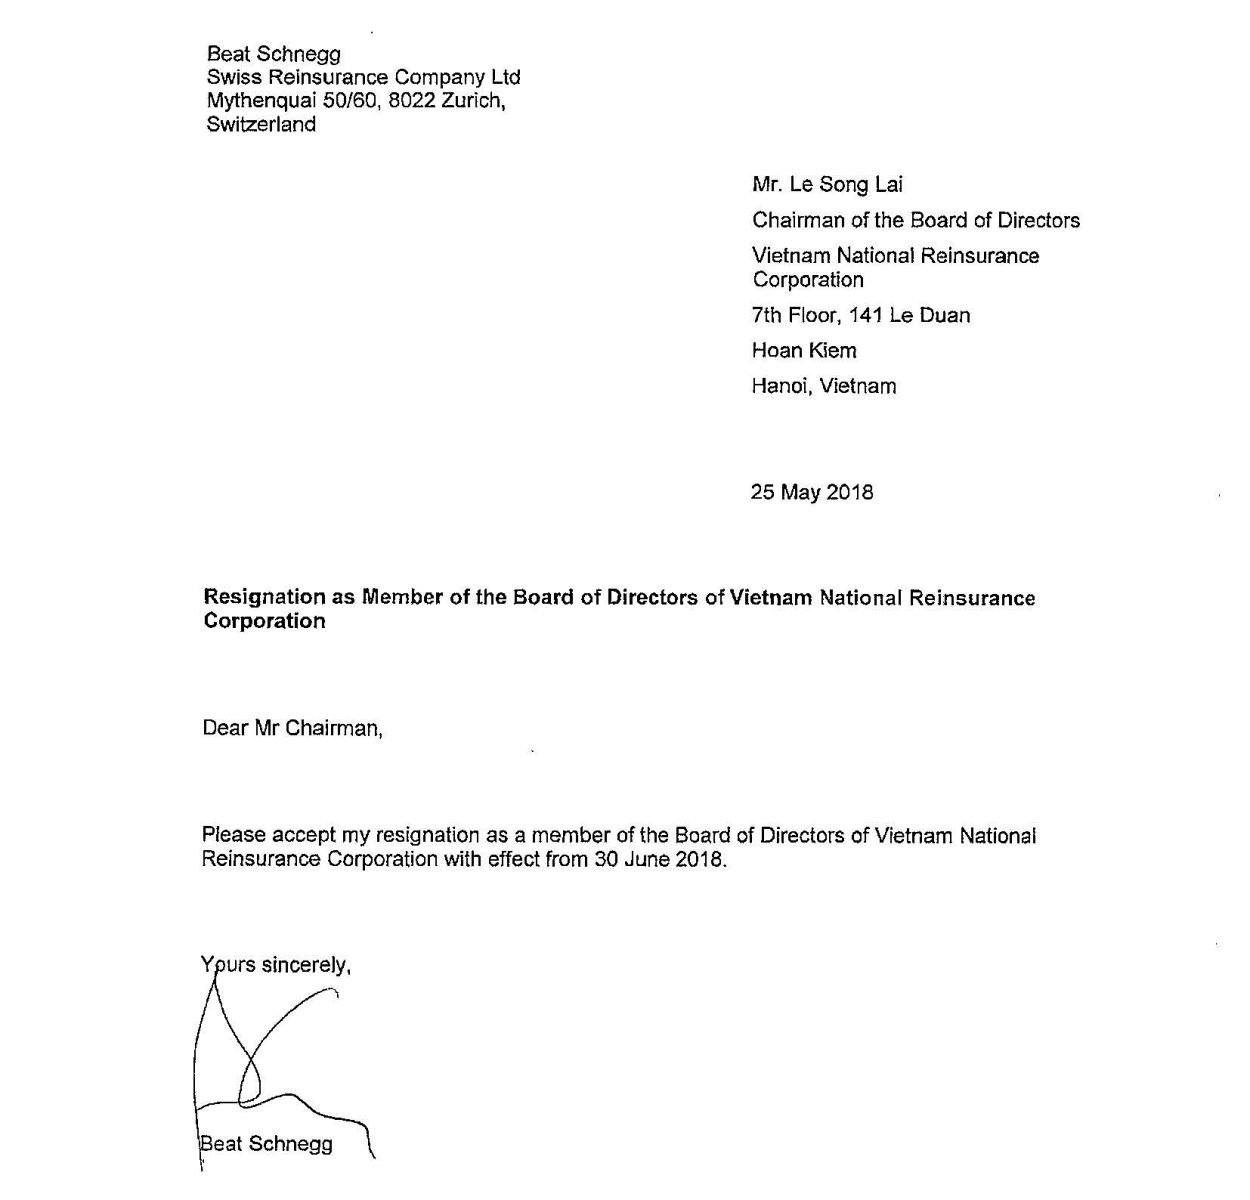 Resignation From Board Of Directors Letter from vinare.com.vn